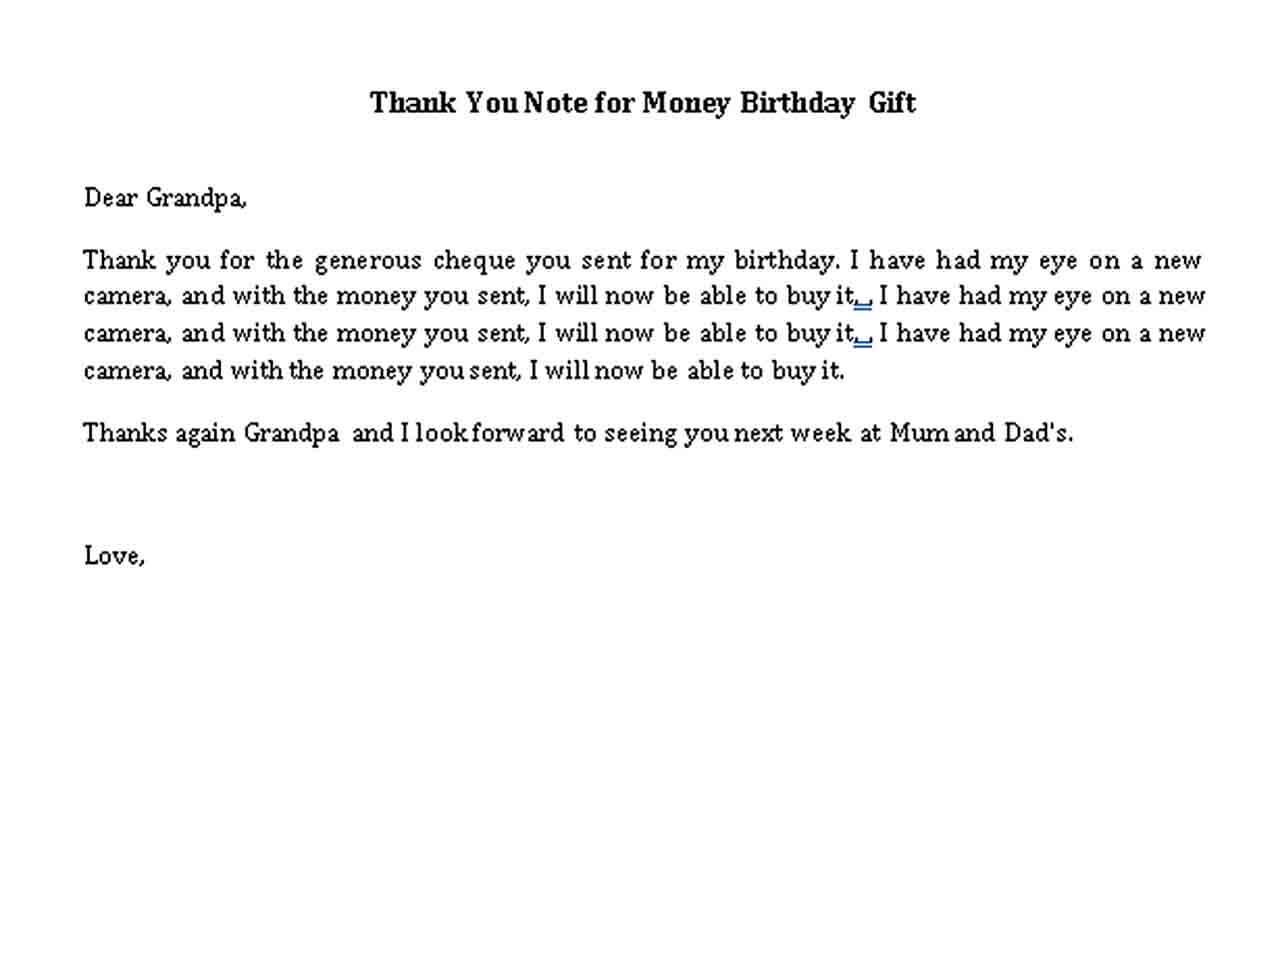 thank you note for money birthday gift